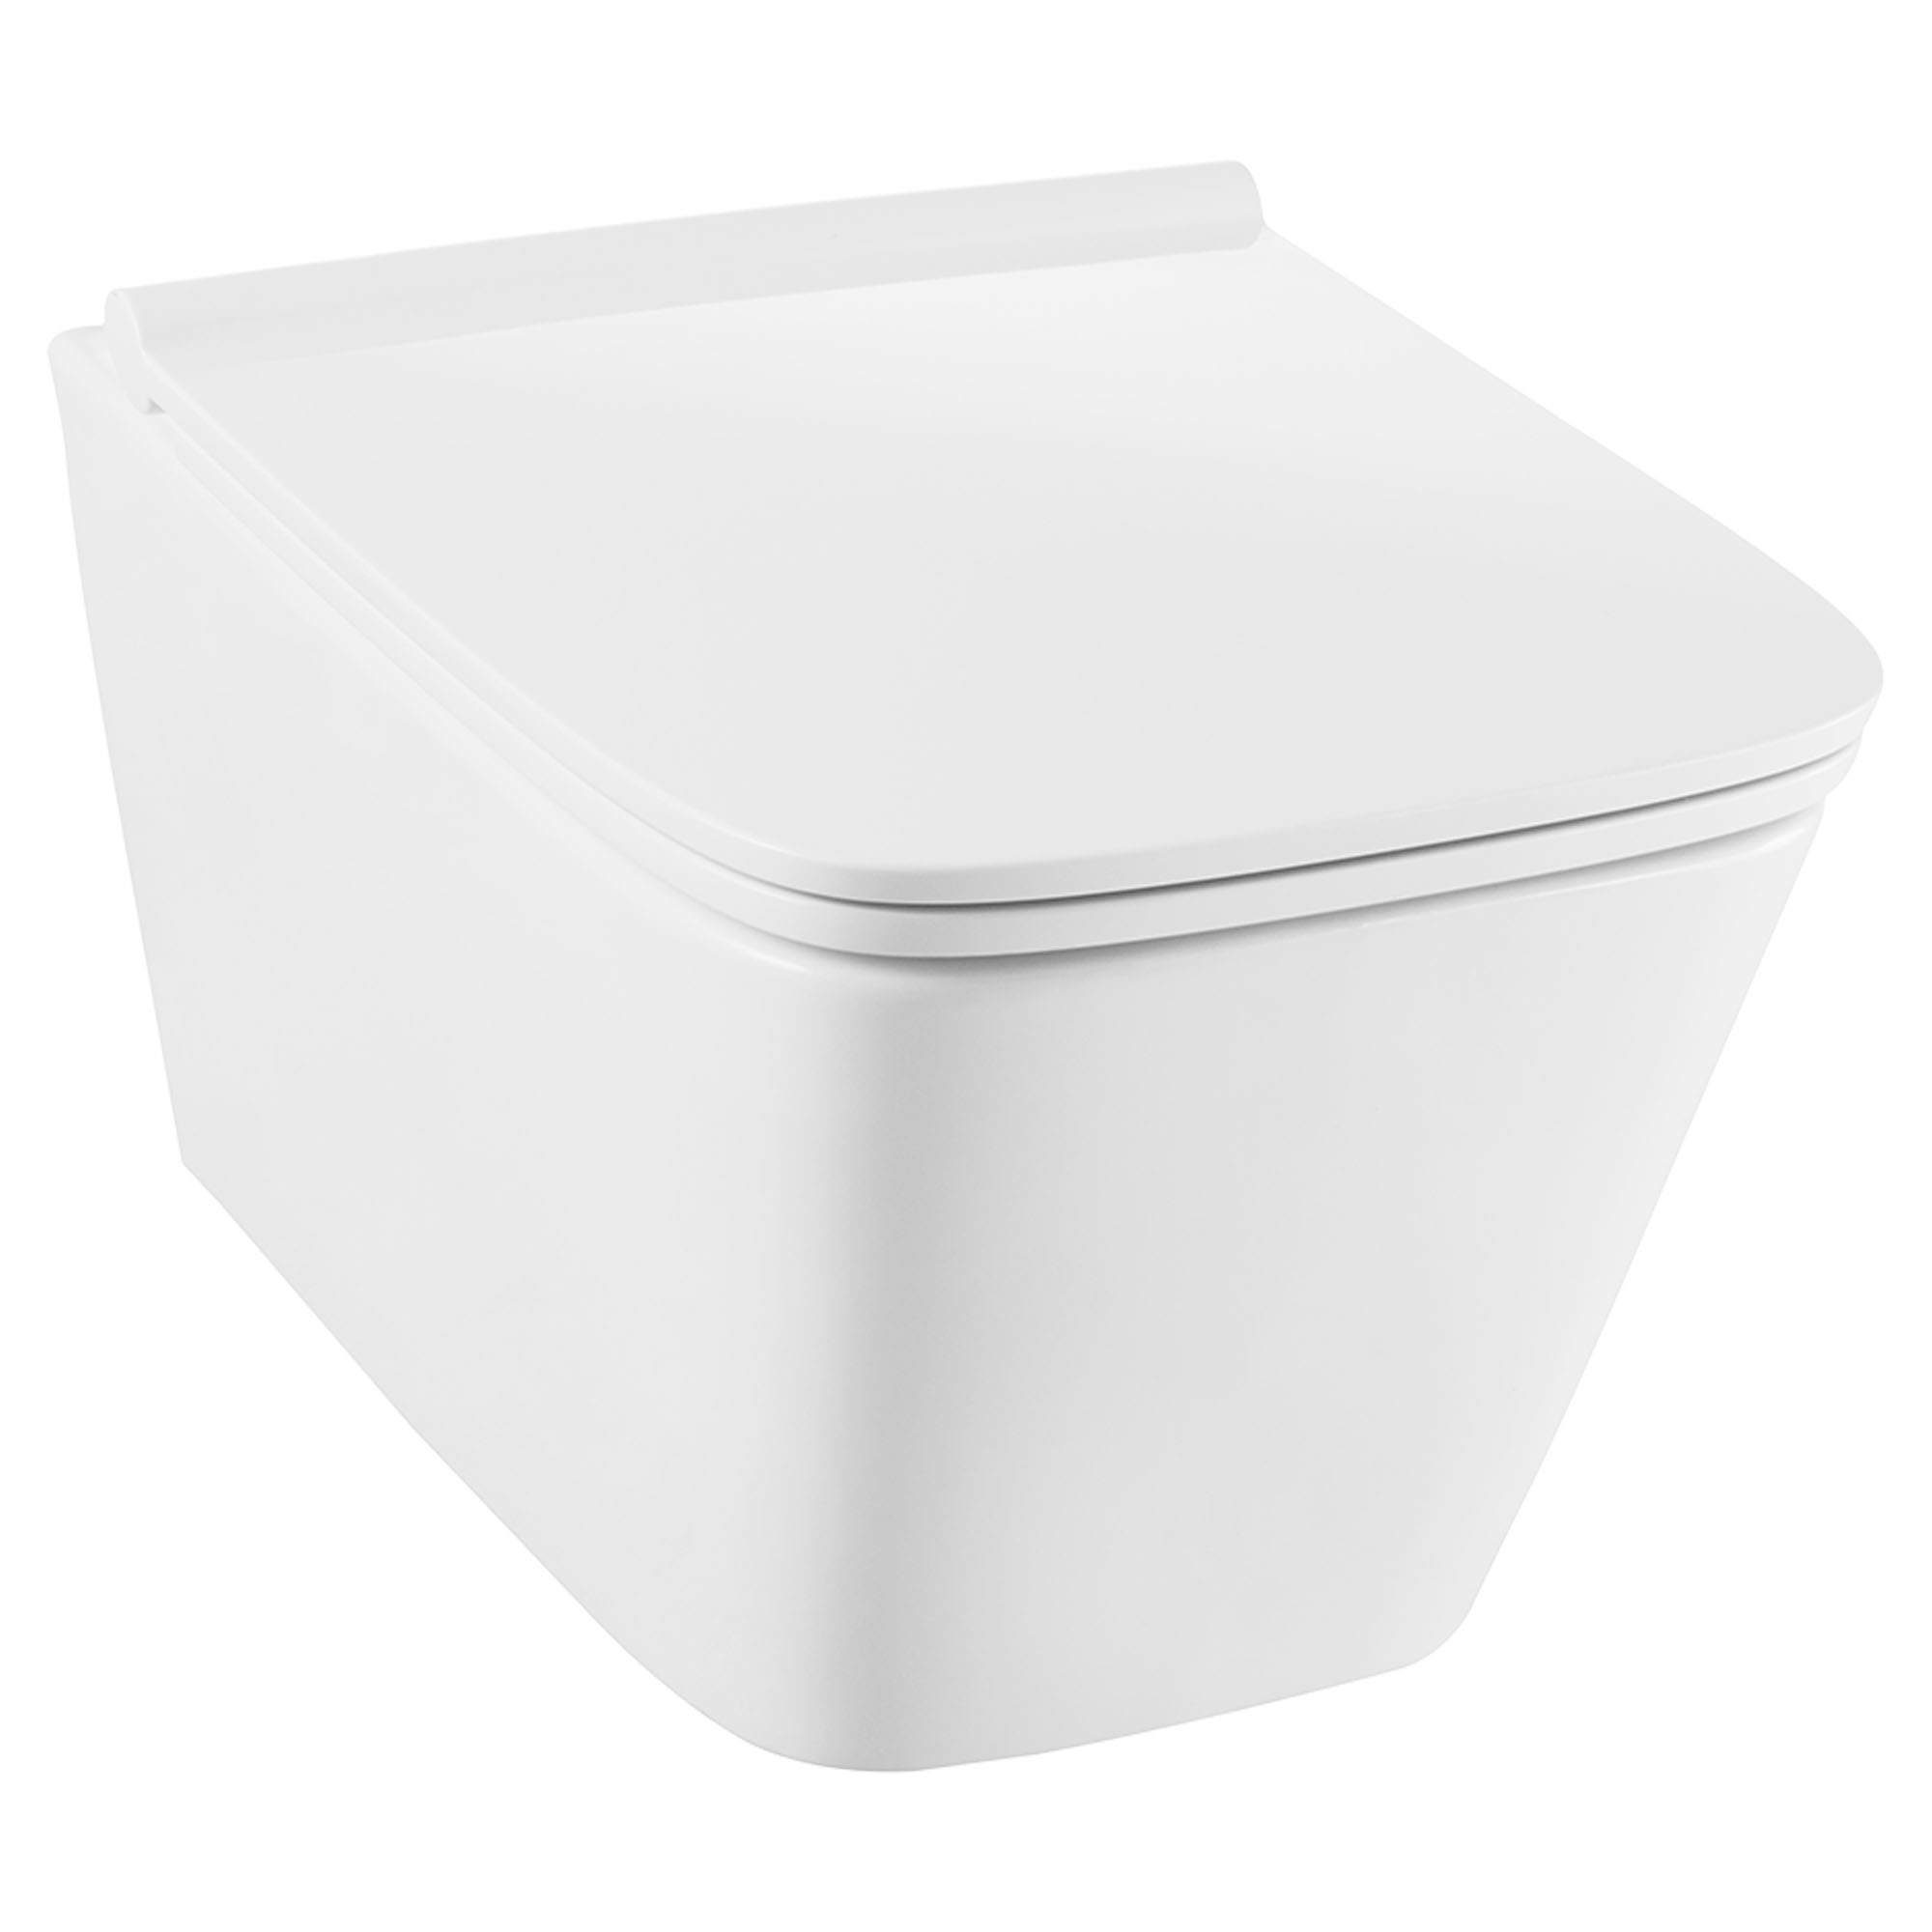 DXV Modulus Wall-Hung Elongated Toilet Bowl with Seat